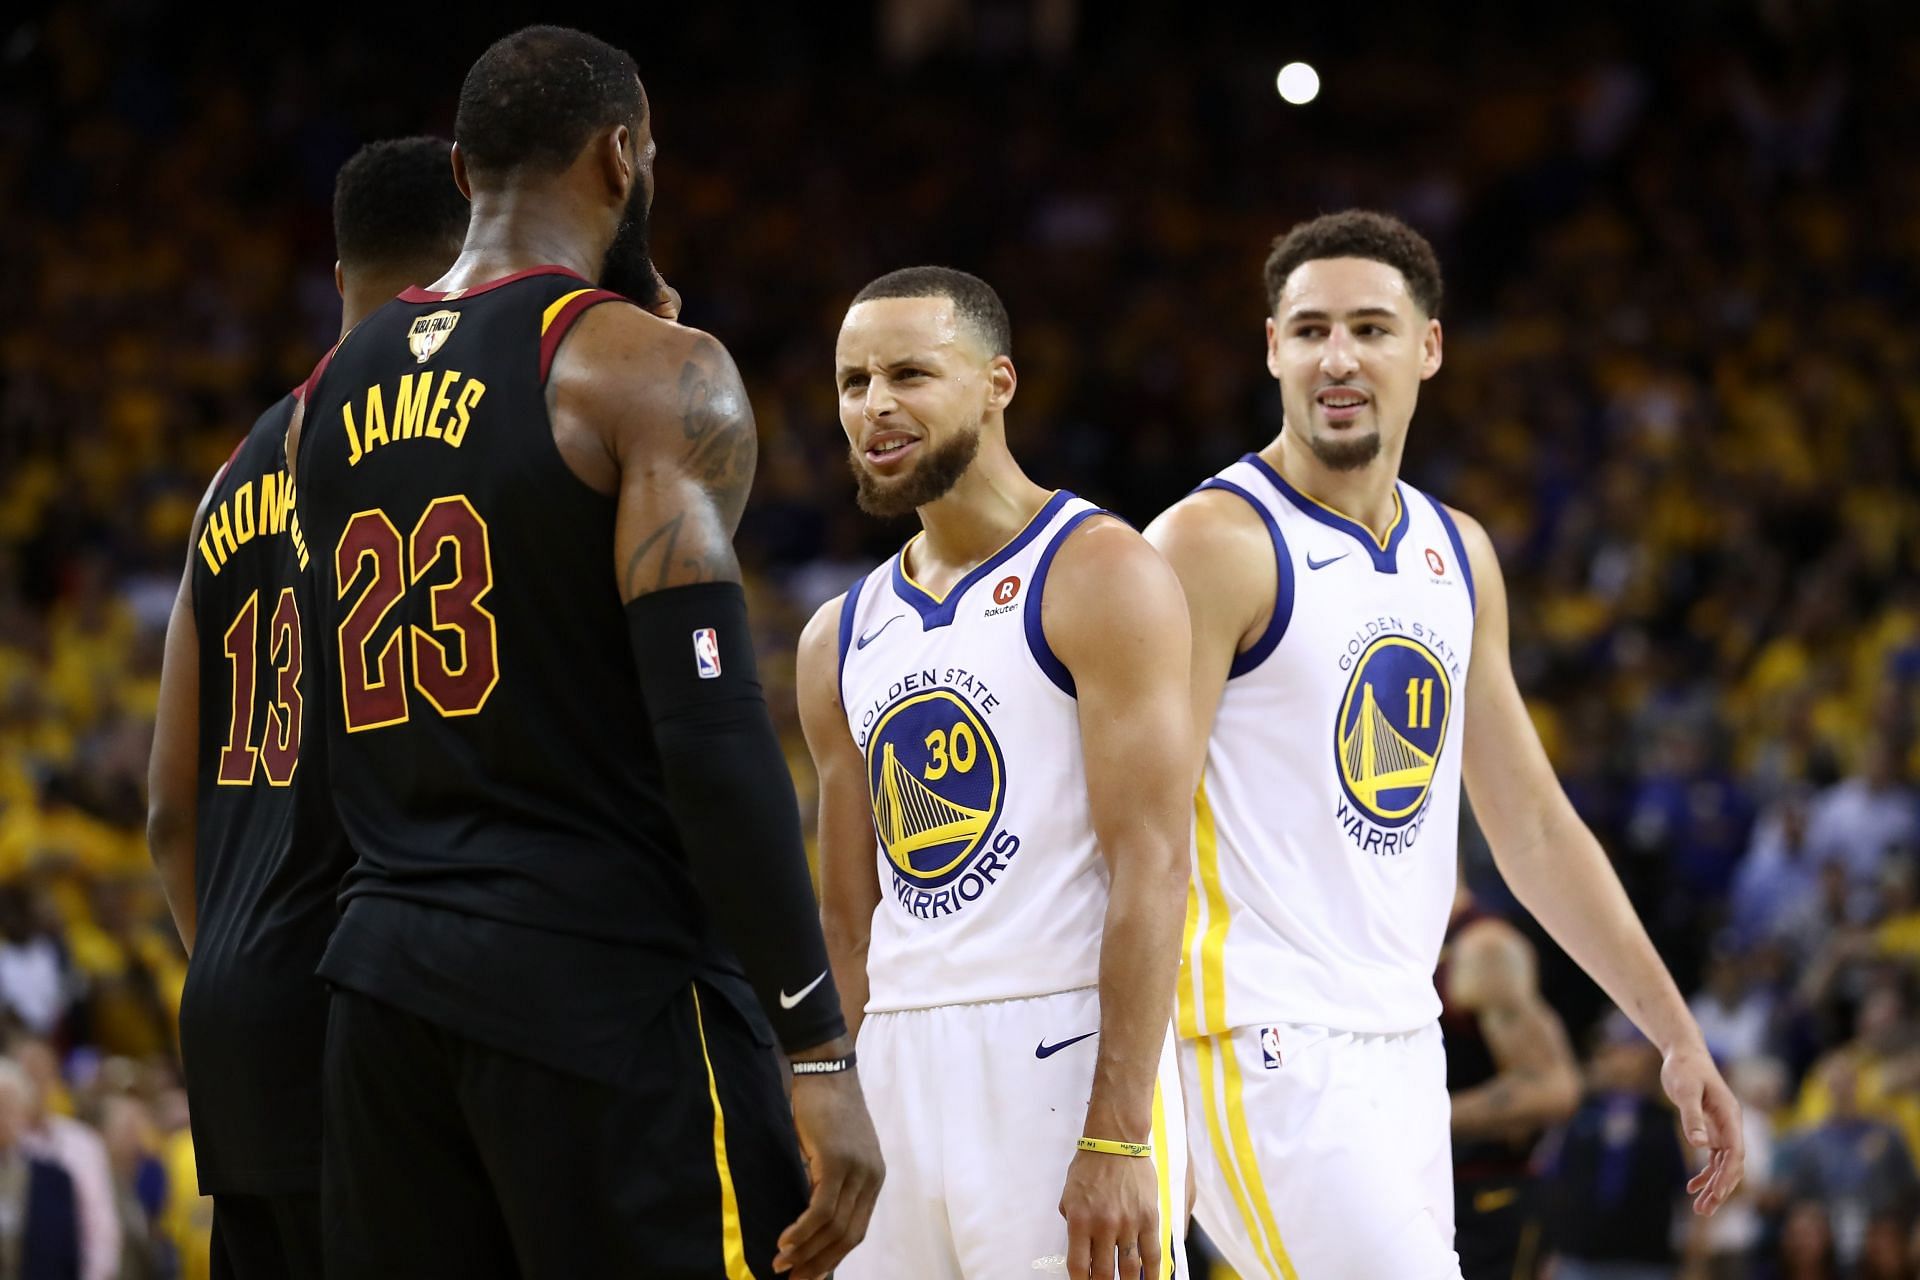 Usually huge rivals, LeBron James and Steph Curry are playing on the same team during the 2022 All-Star Game. [Photo: The Mercury News]